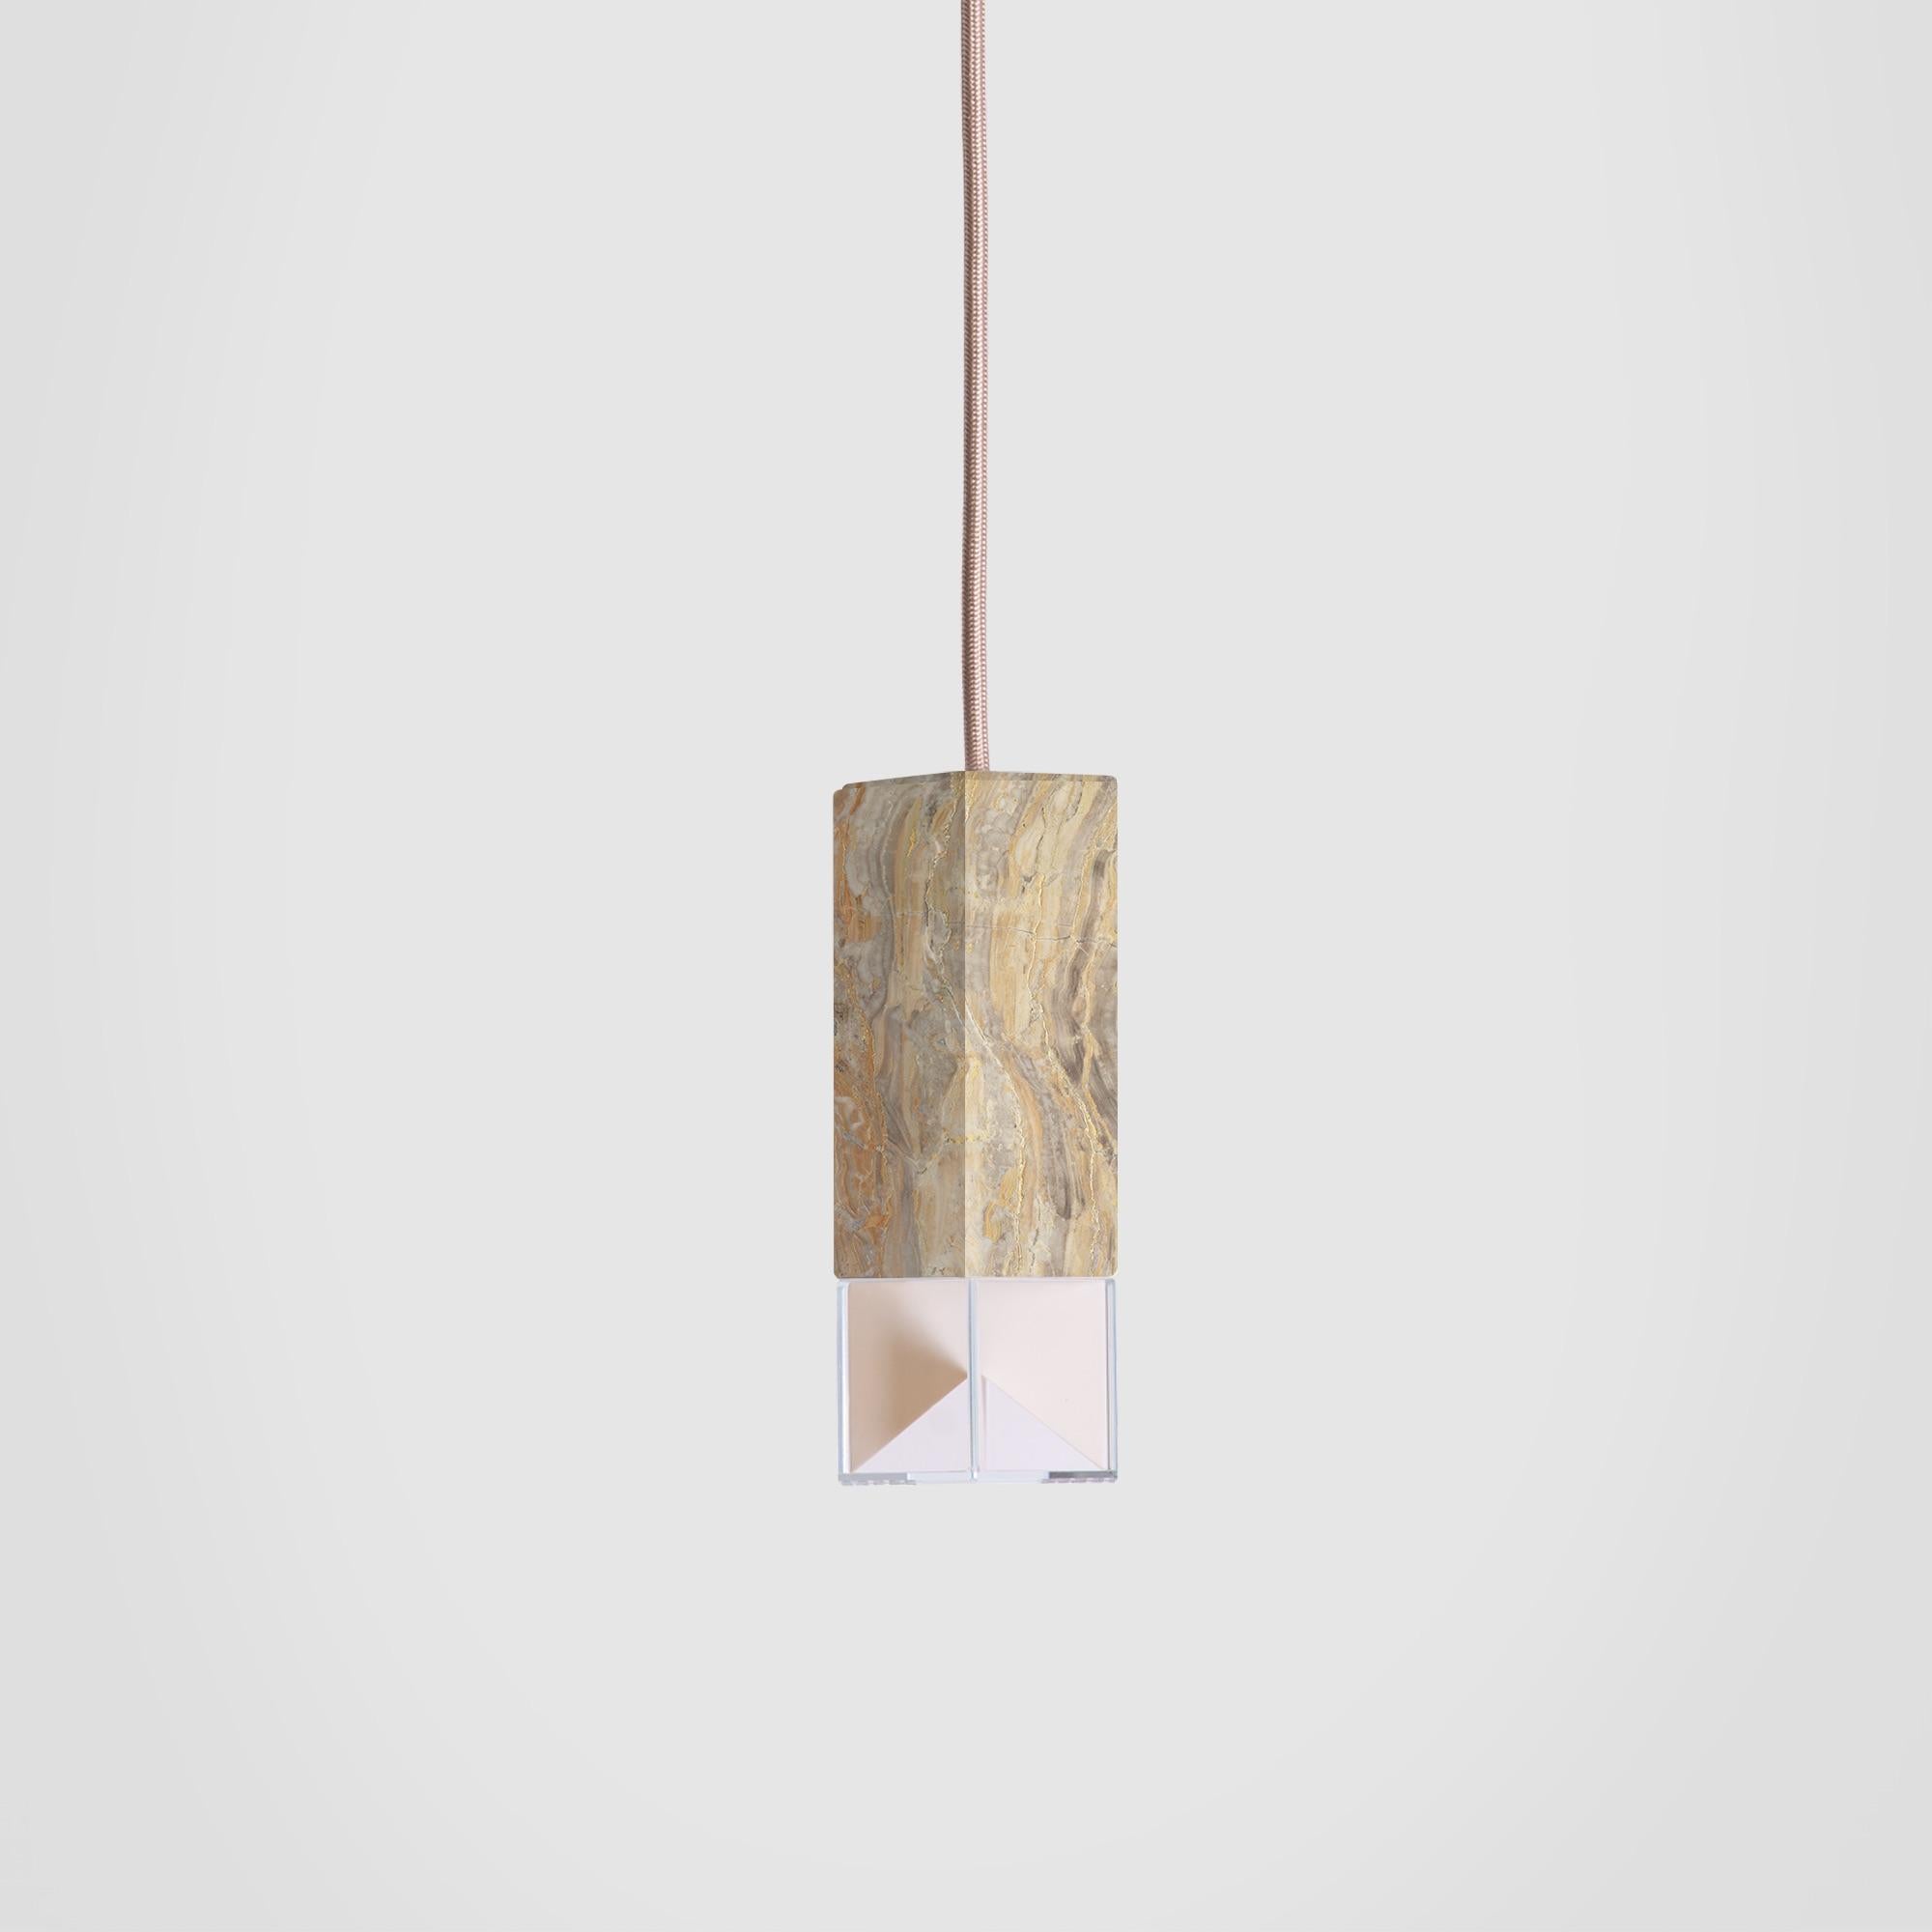 About
Suspension Single Lamp in Arabescato Marble by Formaminima

Lamp/One Marble Revamp 02 Edition
Design by Formaminima
Single Pendant
Materials:
Body lamp handcrafted in solid Arabescato Orobico marble / crystal glass diffuser hosting Limoges